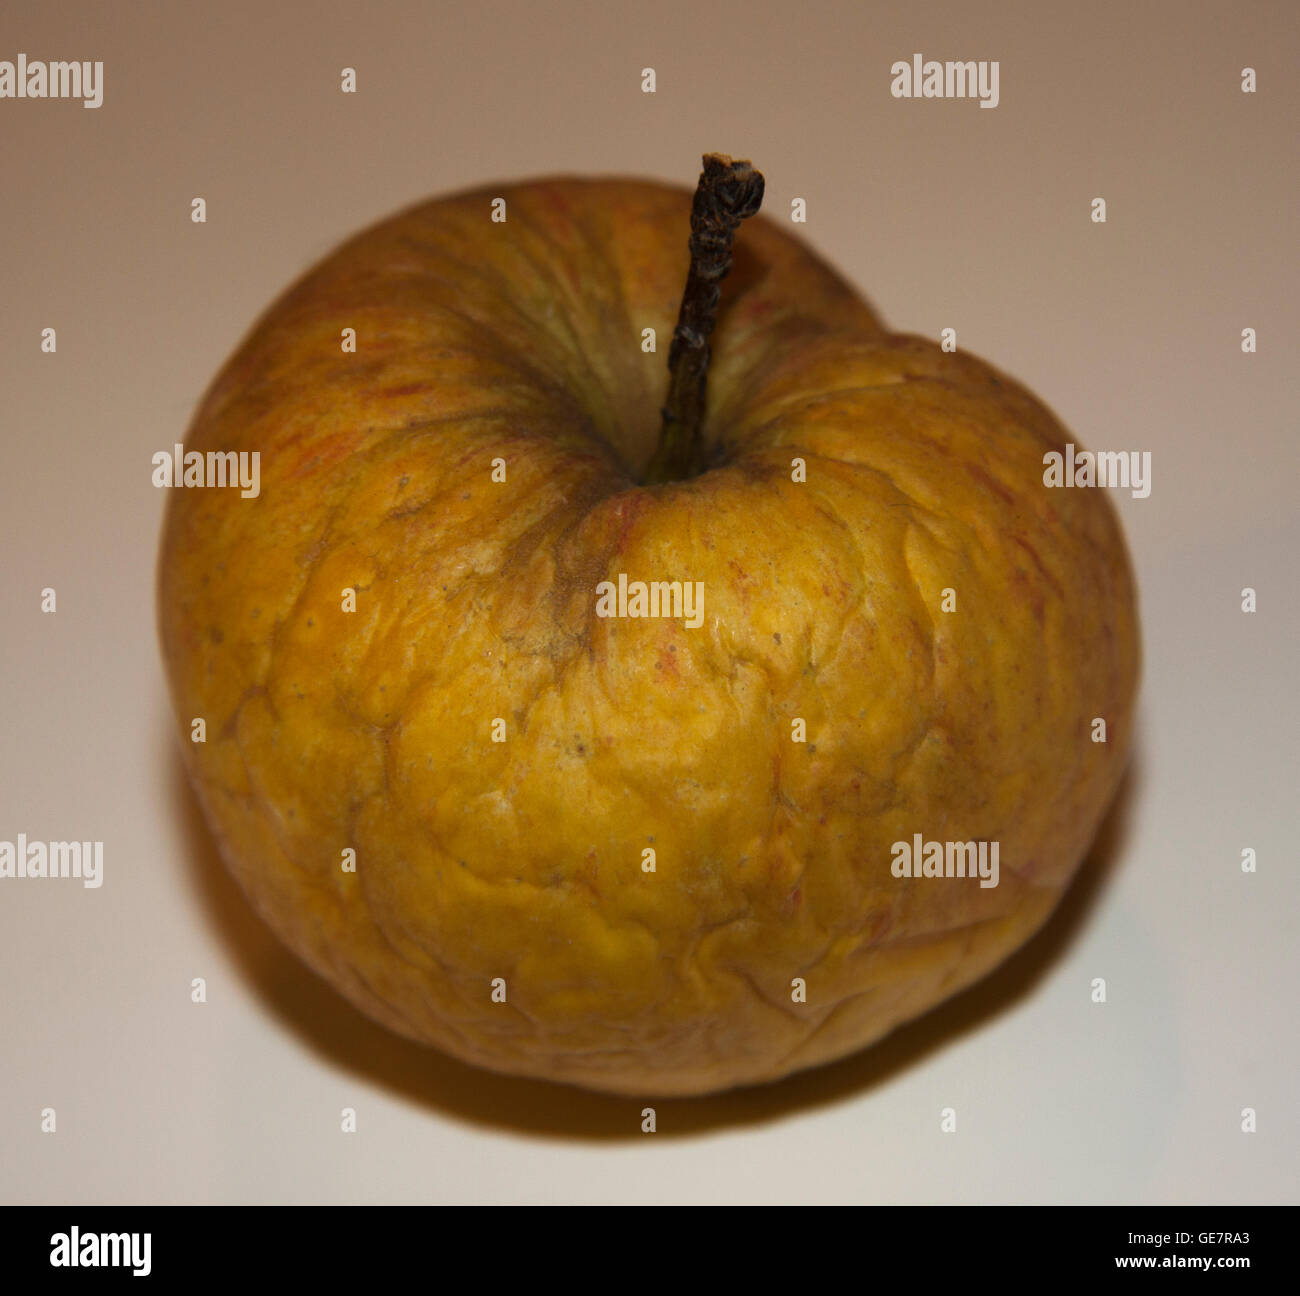 Dehydrated apple (Golden Delicious) demonstrating characteristics similar to aging human skin. The smooth yellow skin has shrunk Stock Photo